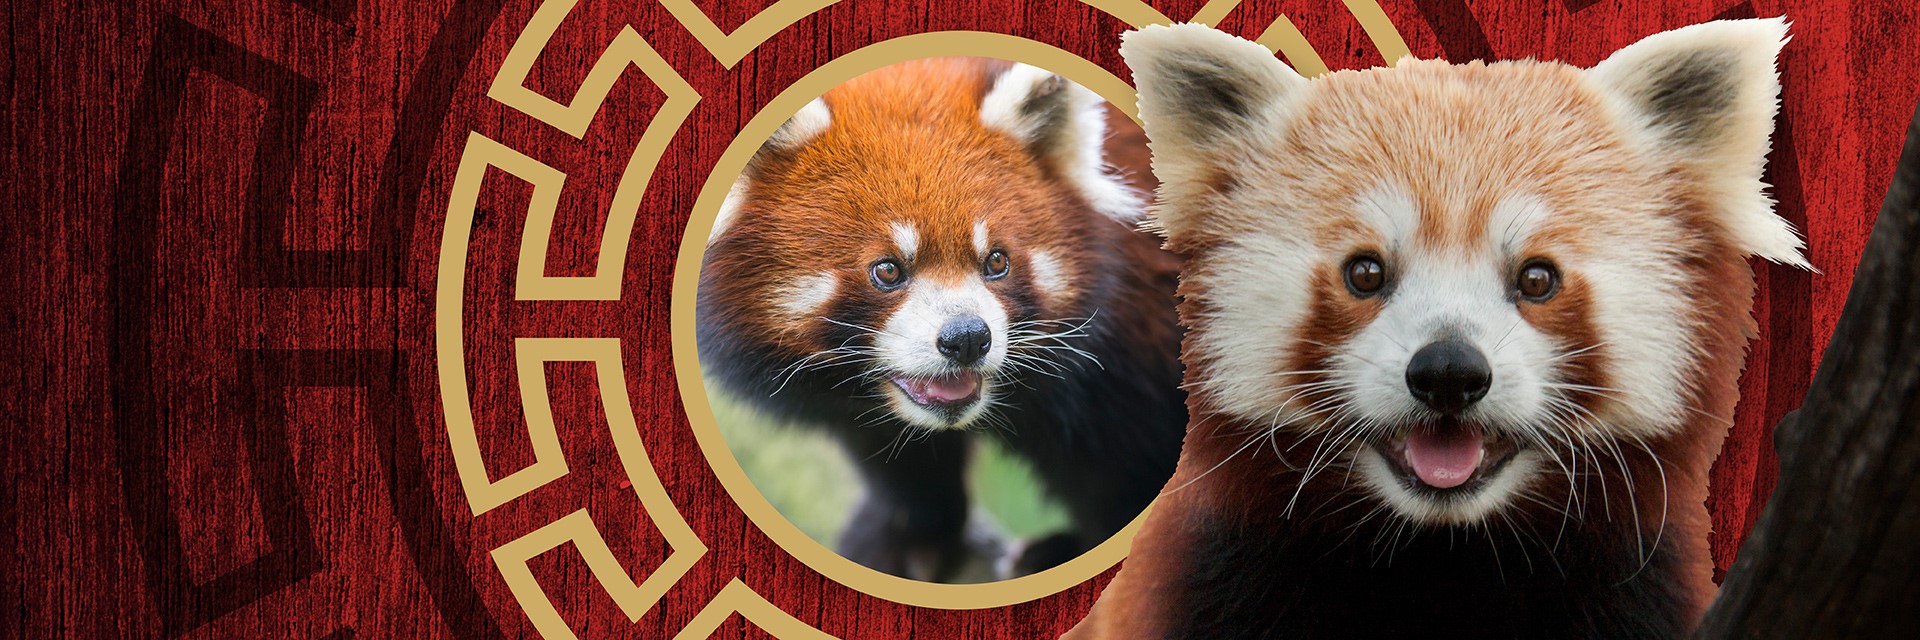 helvede smid væk Converge Fun Facts About Red Pandas • Red Panda Facts & Info for Kids